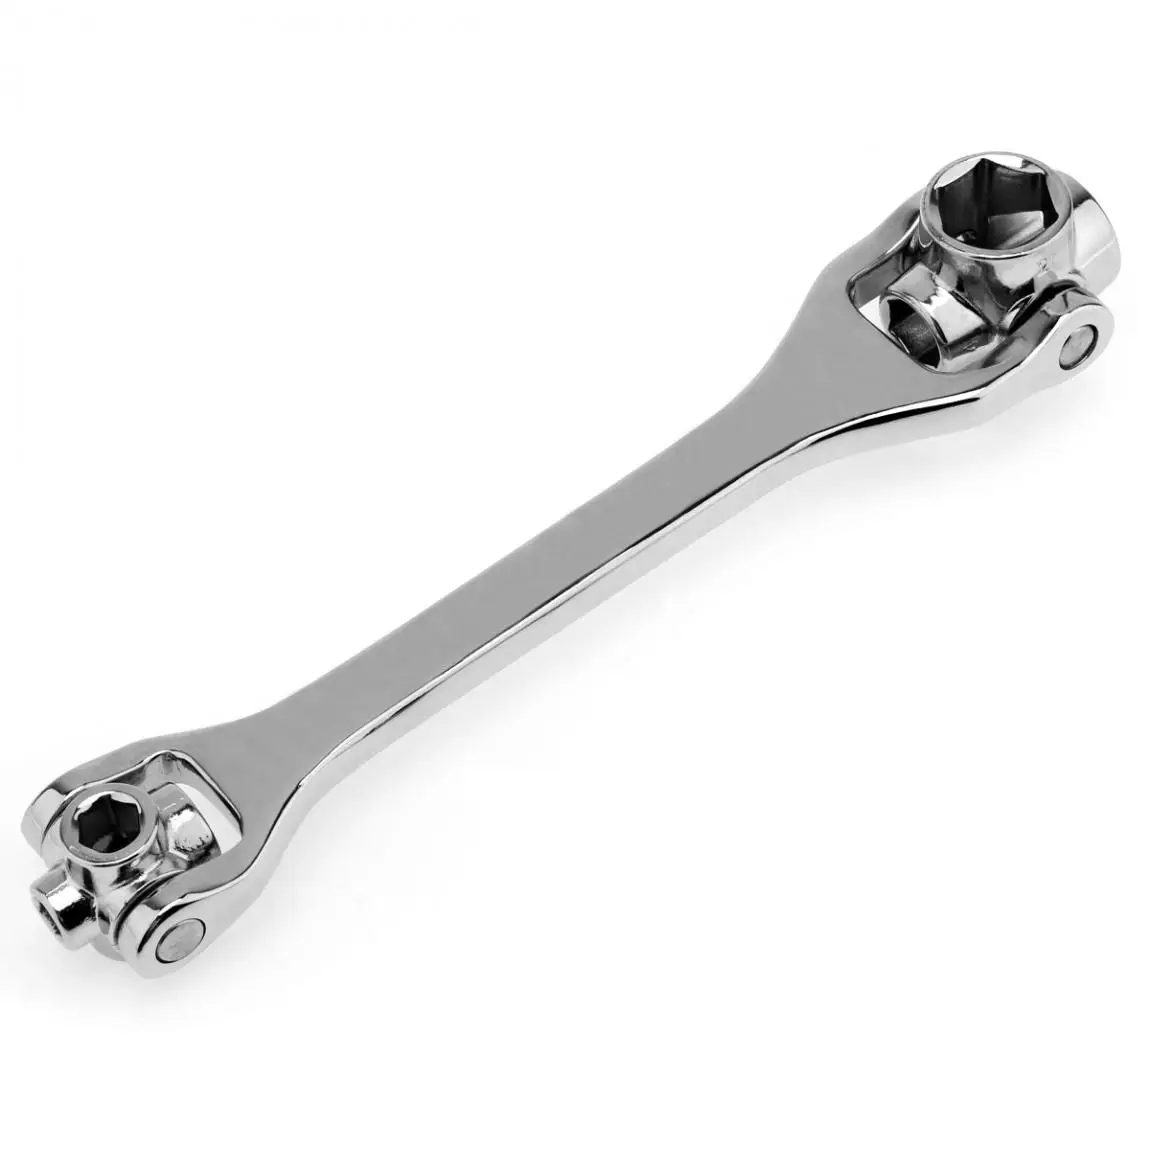 Car Socket Wrench 8/10/12/13/14/17/19/21 8 In 1 Spanner Universal Hand Tools 